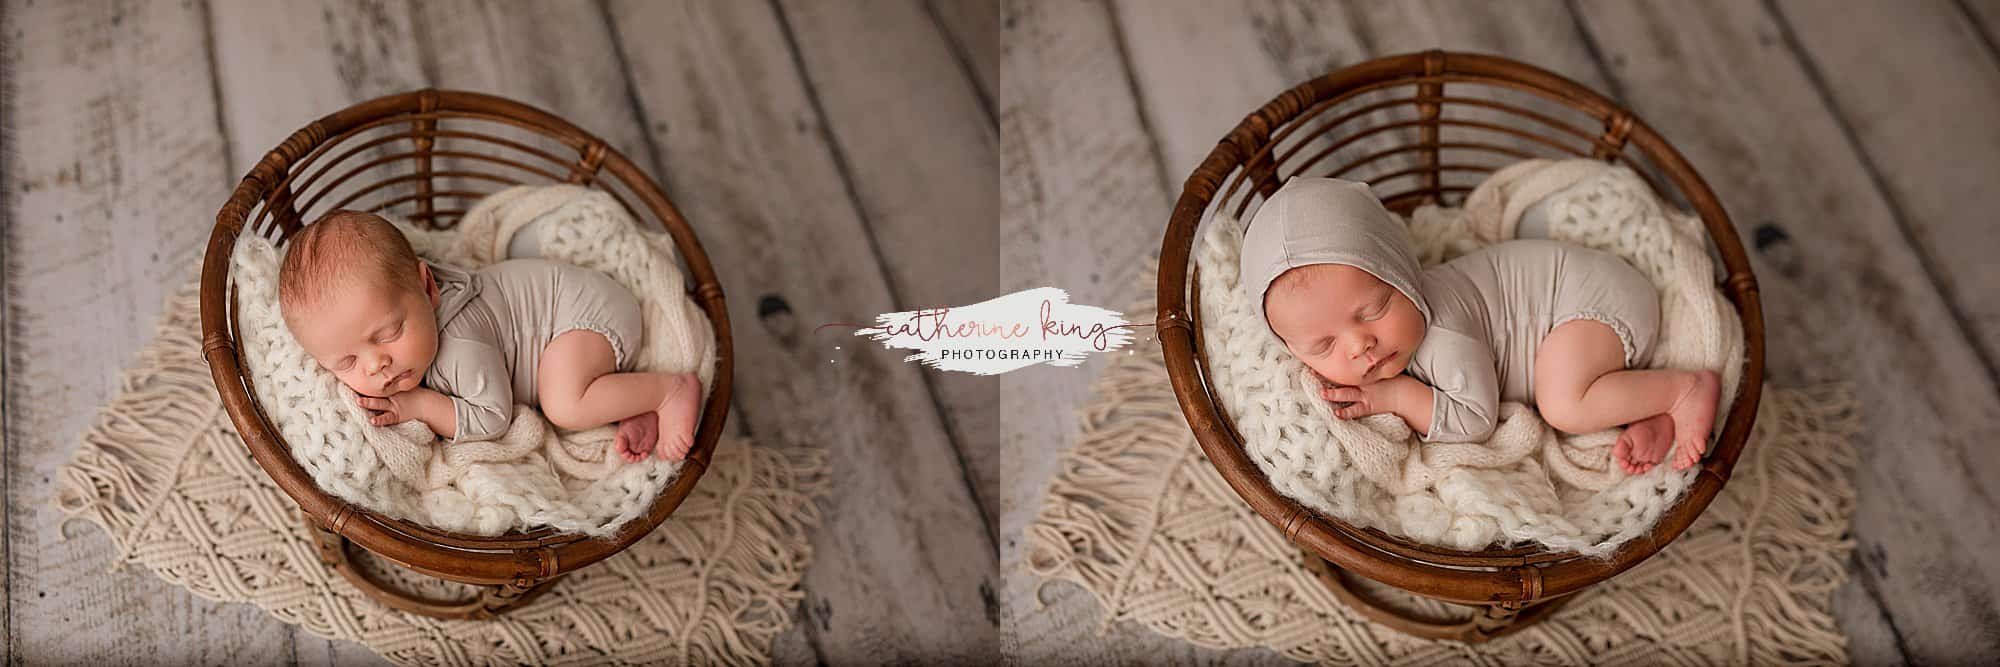 Sneak peek at an adorable newborn baby photography session in Madison CT